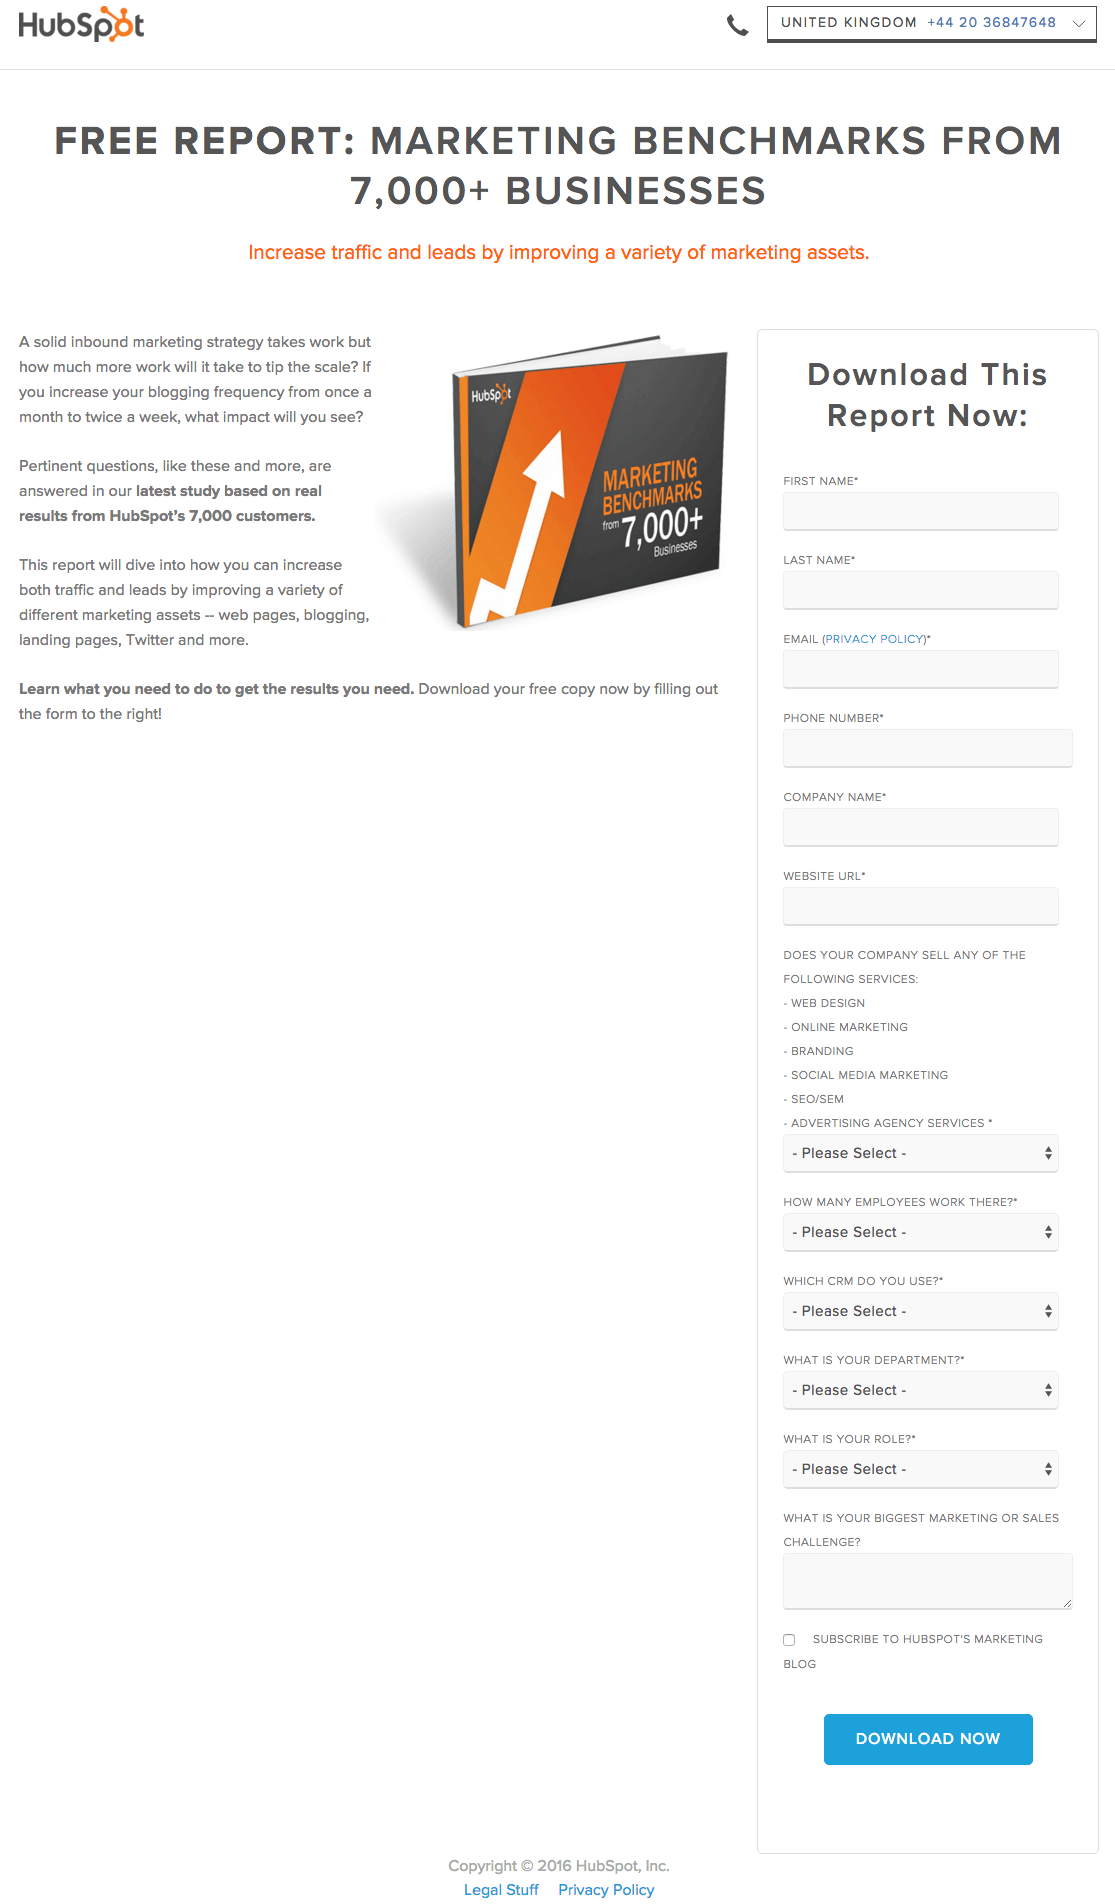 An example of "carrot content" from HubSpot. 